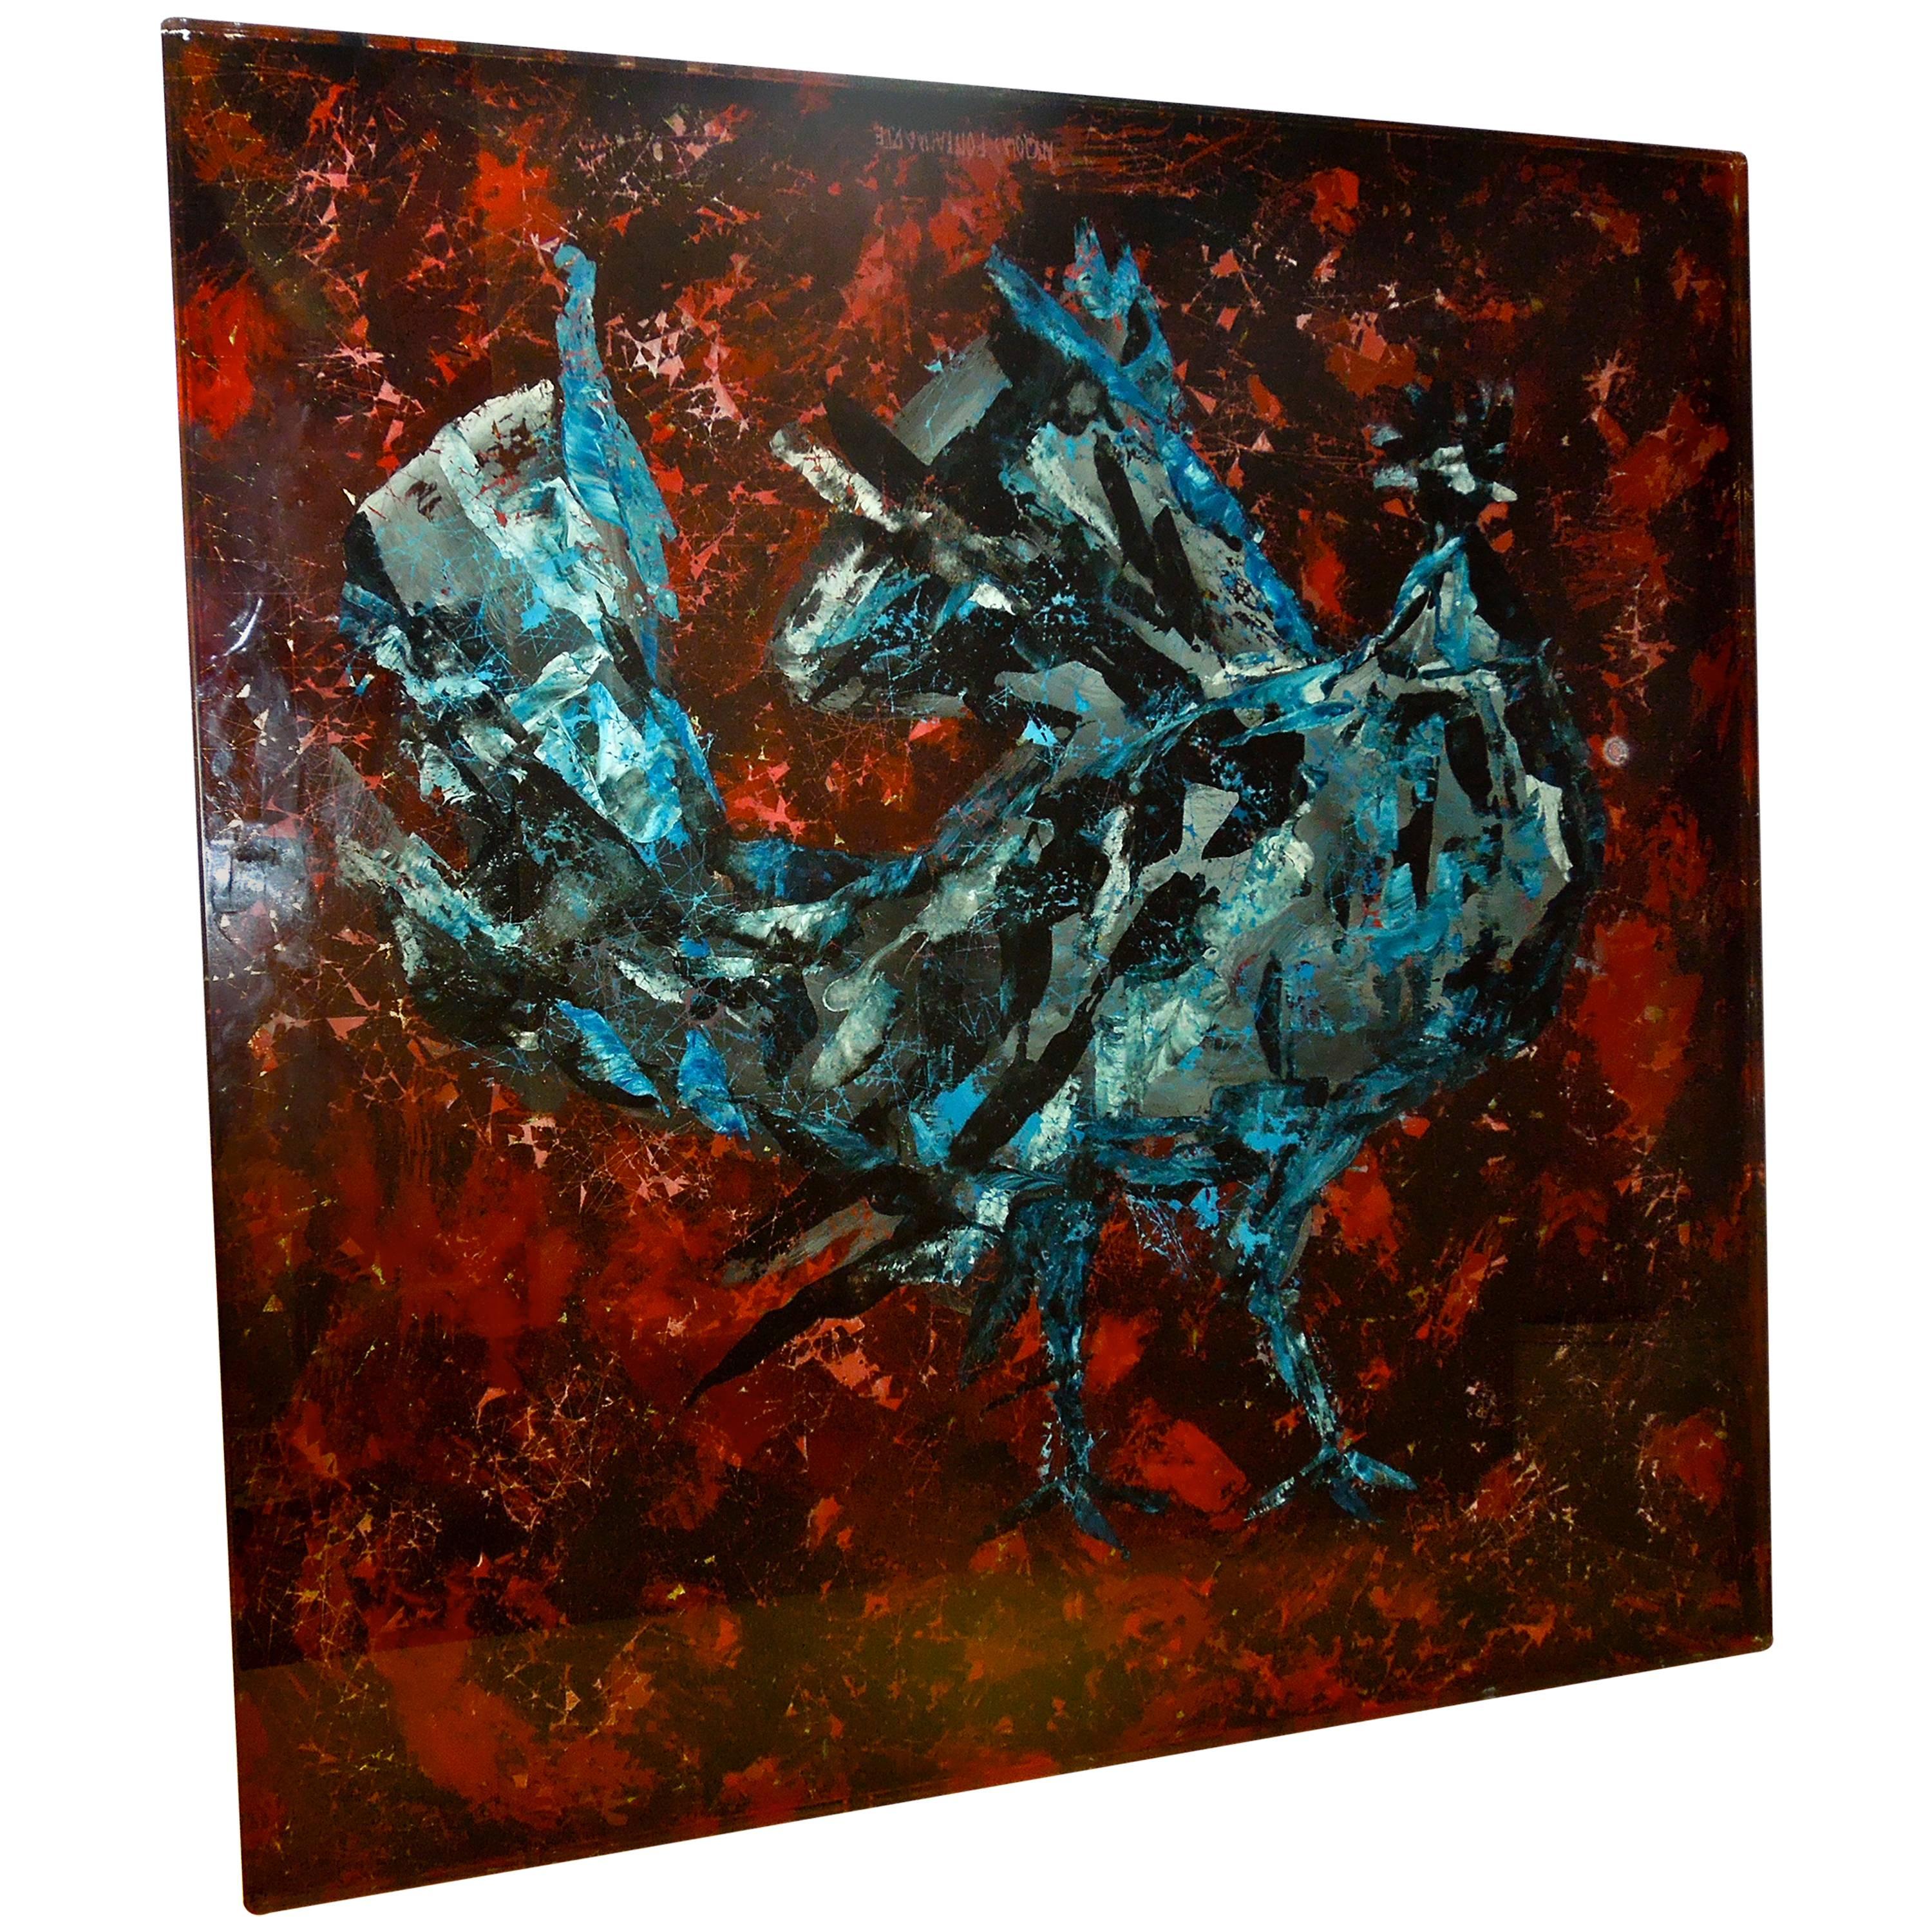 This amazing piece comes from a vintage multi million dollar Rancho Mirage, CA estate. It is a large square panel of 3/4